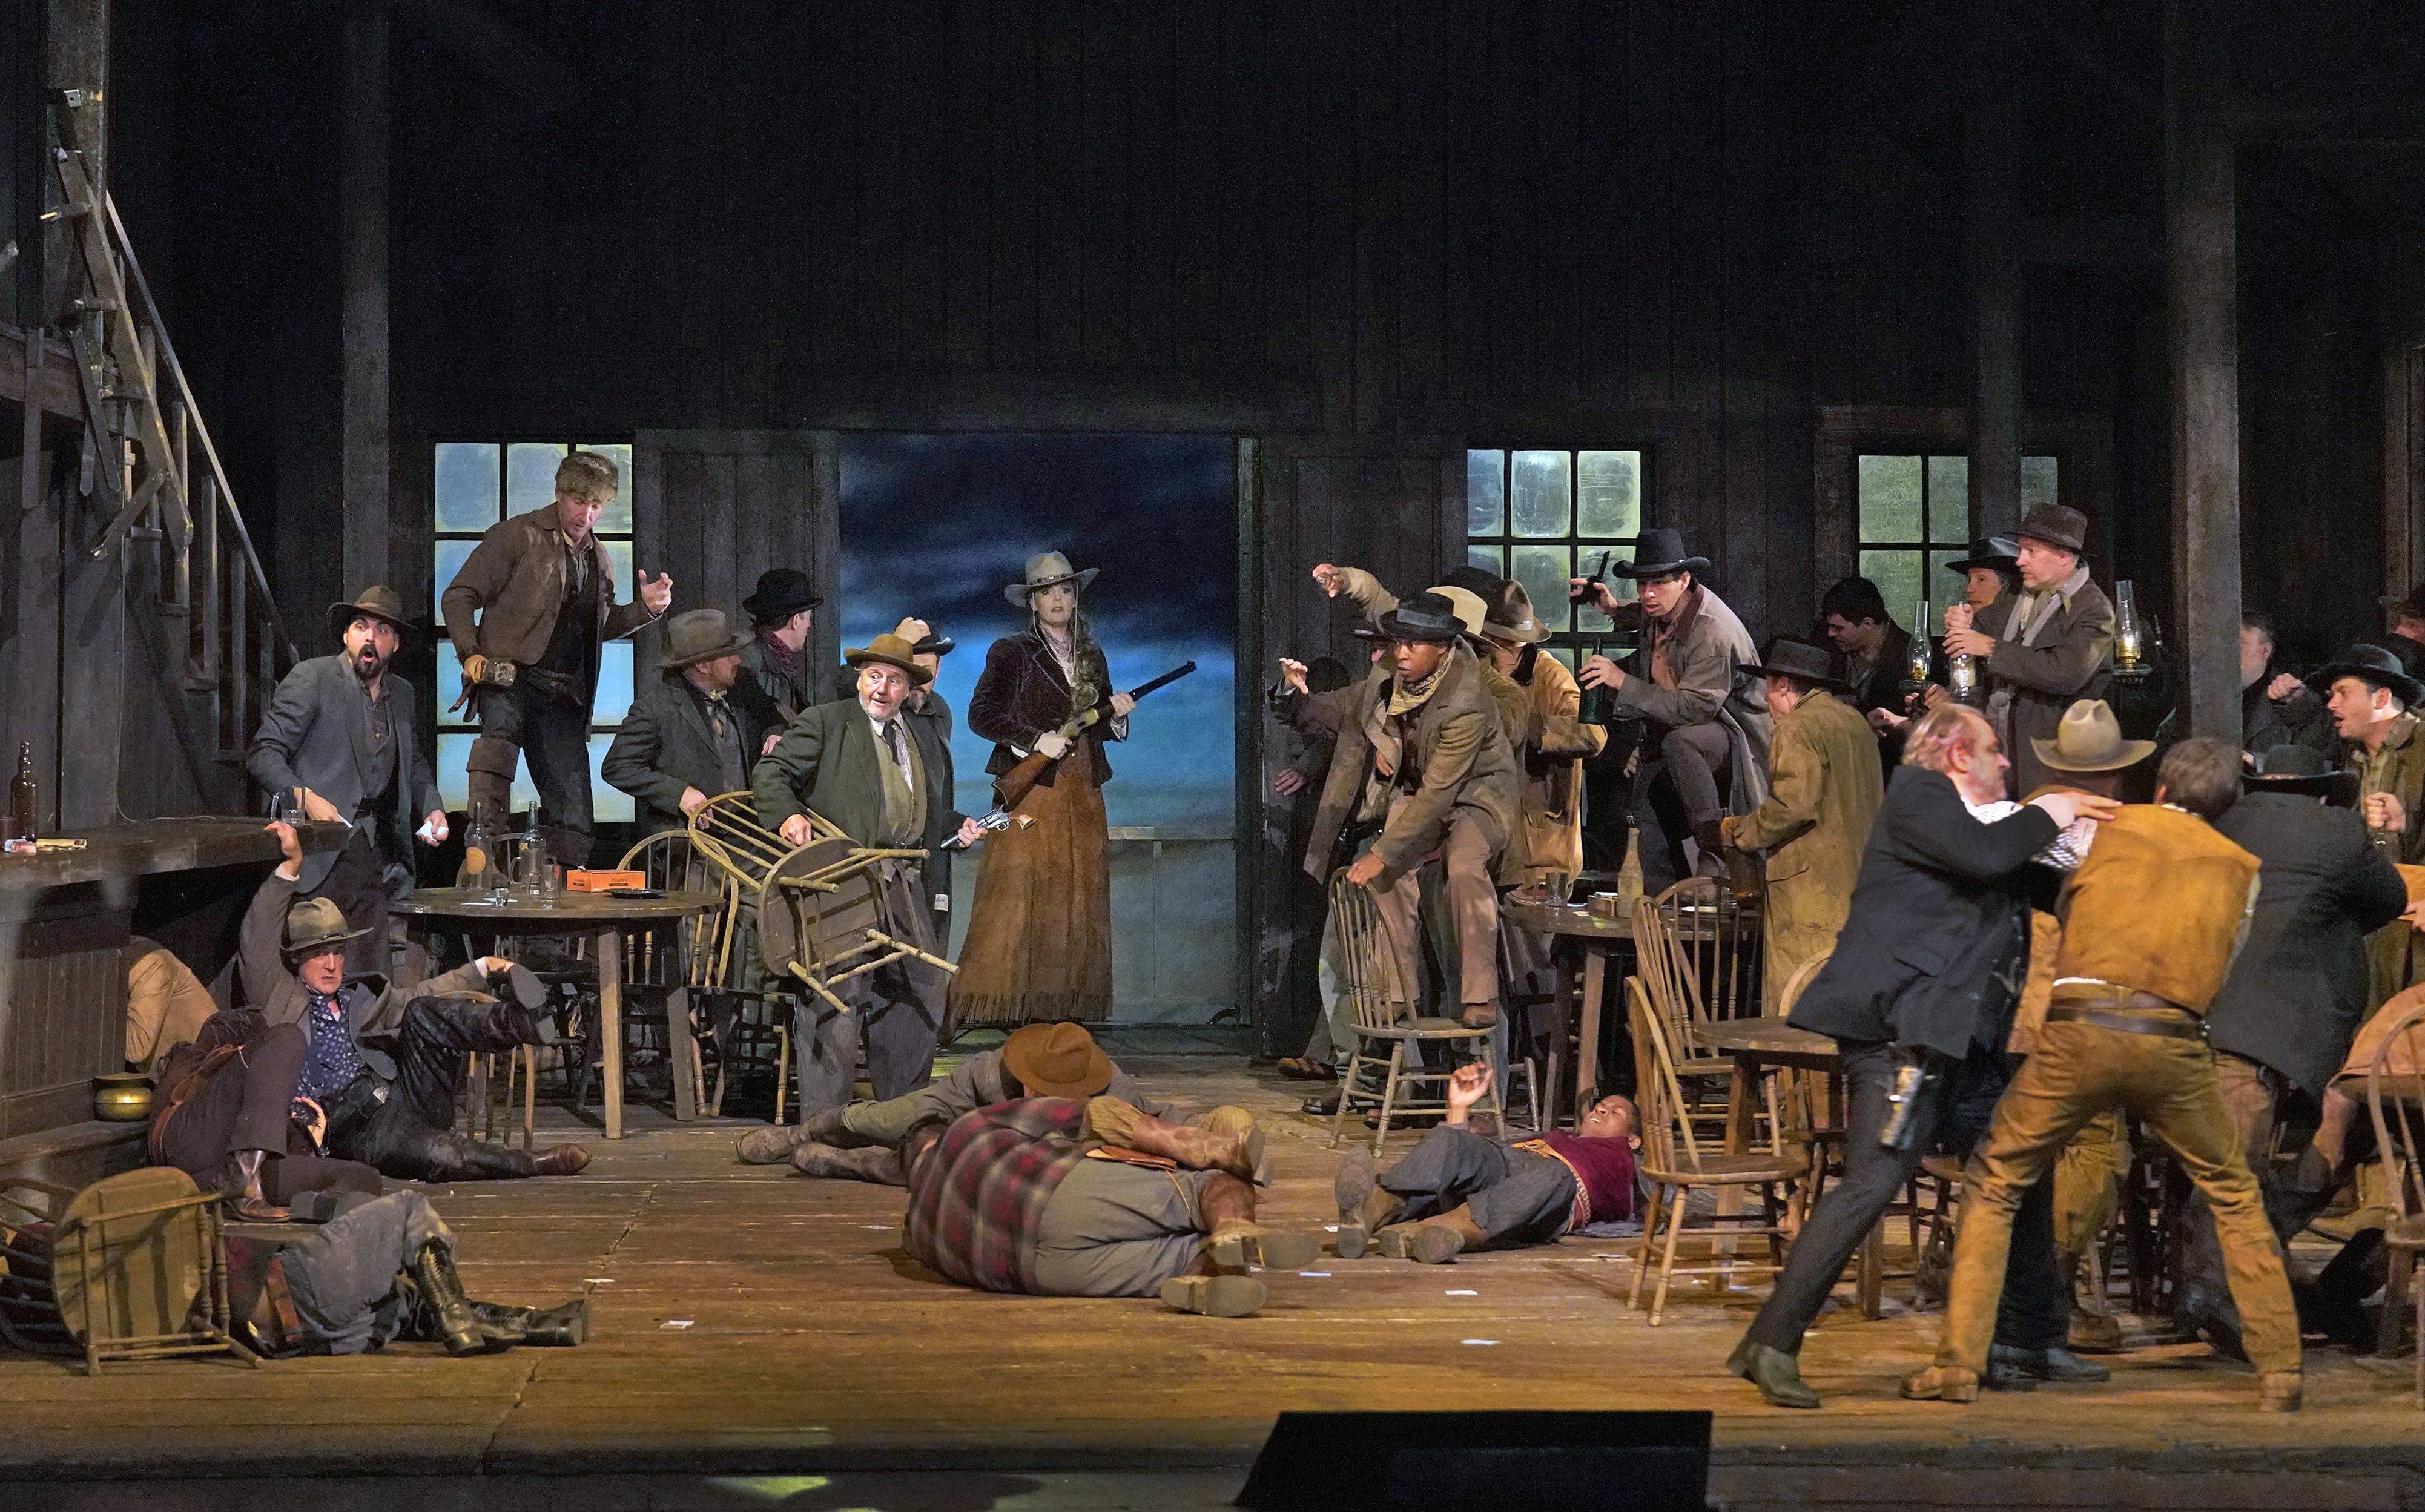 A scene from Act I of Puccini's "La Fanciulla del West" with Eva-Maria Westbroek as Minnie.